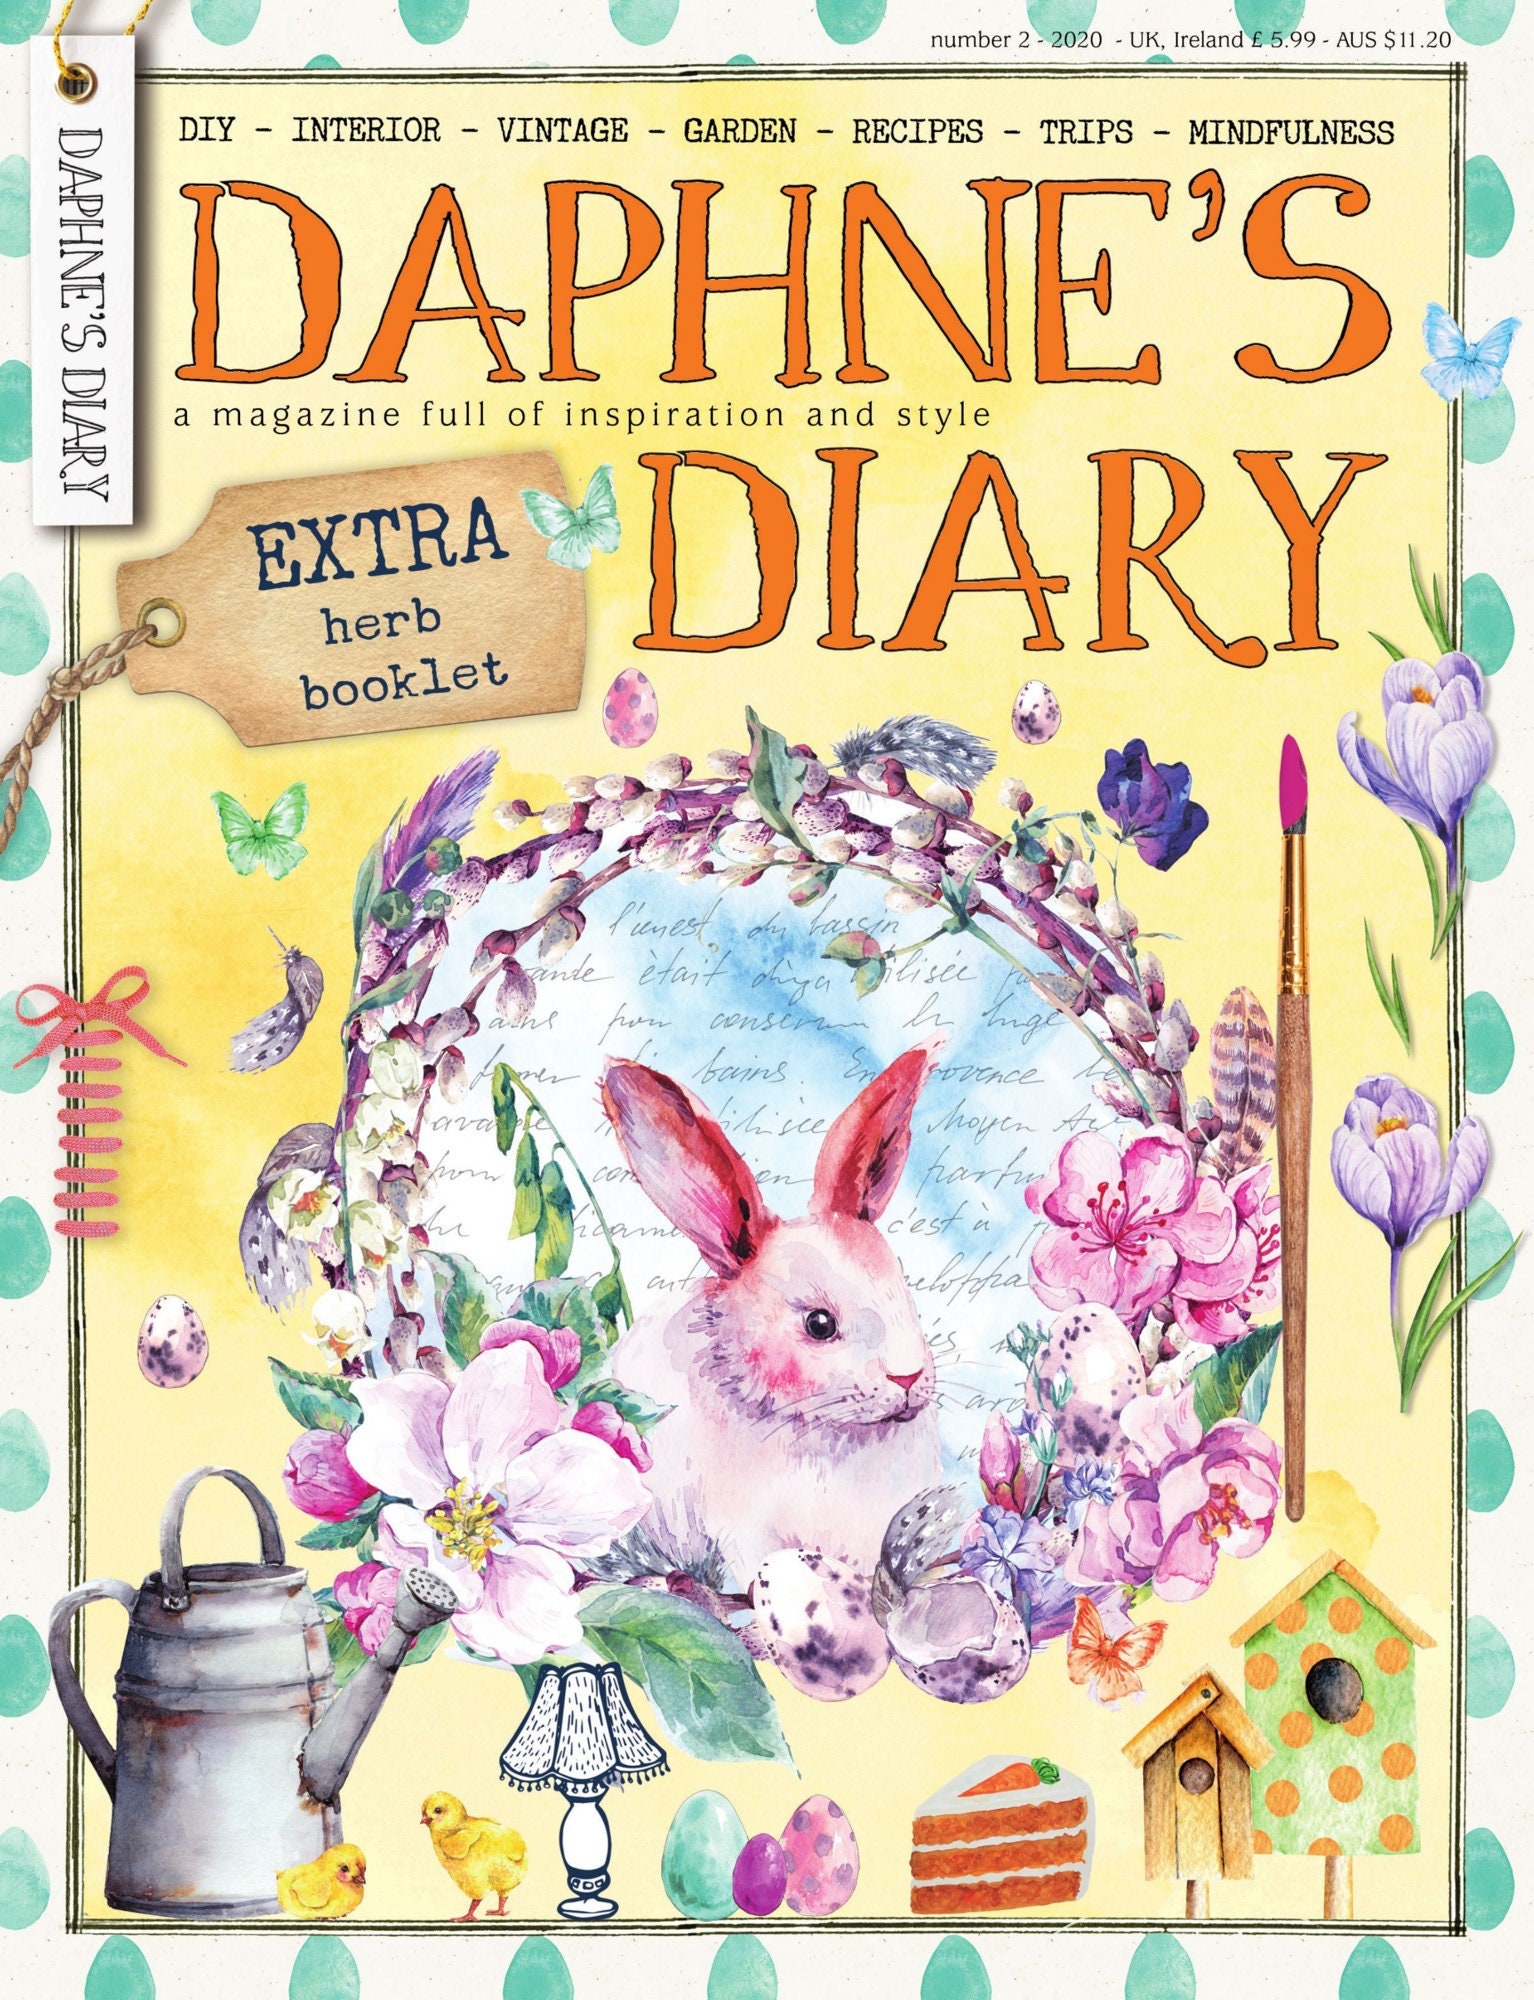 Daphnes Diary English Edition Issue 03, 2020 Extra Herb Booklet